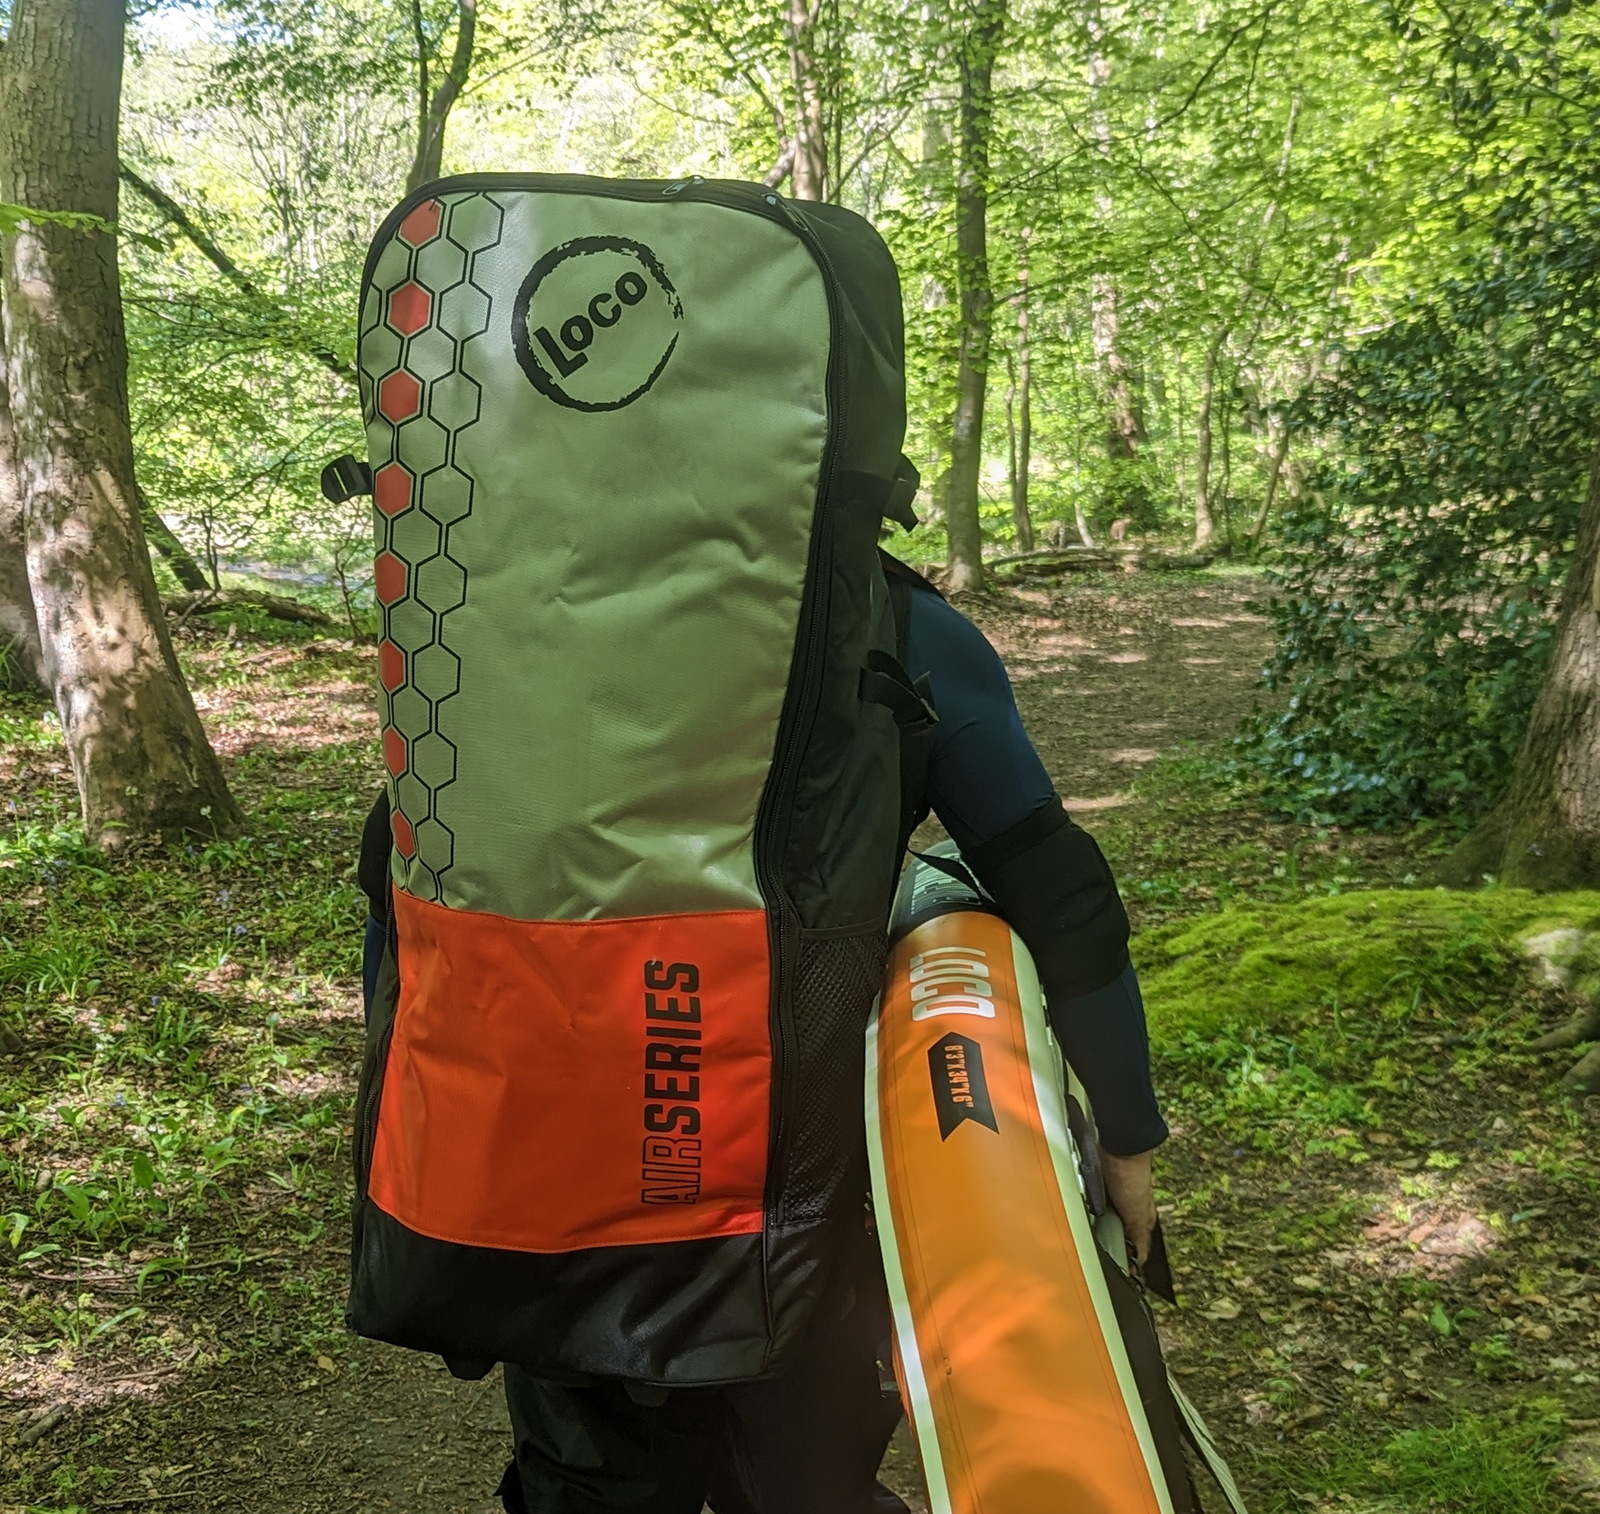 Len Cole carrying SUPs in the woods, Planning Your First SUP Adventure: Tips for an Awesome Journey